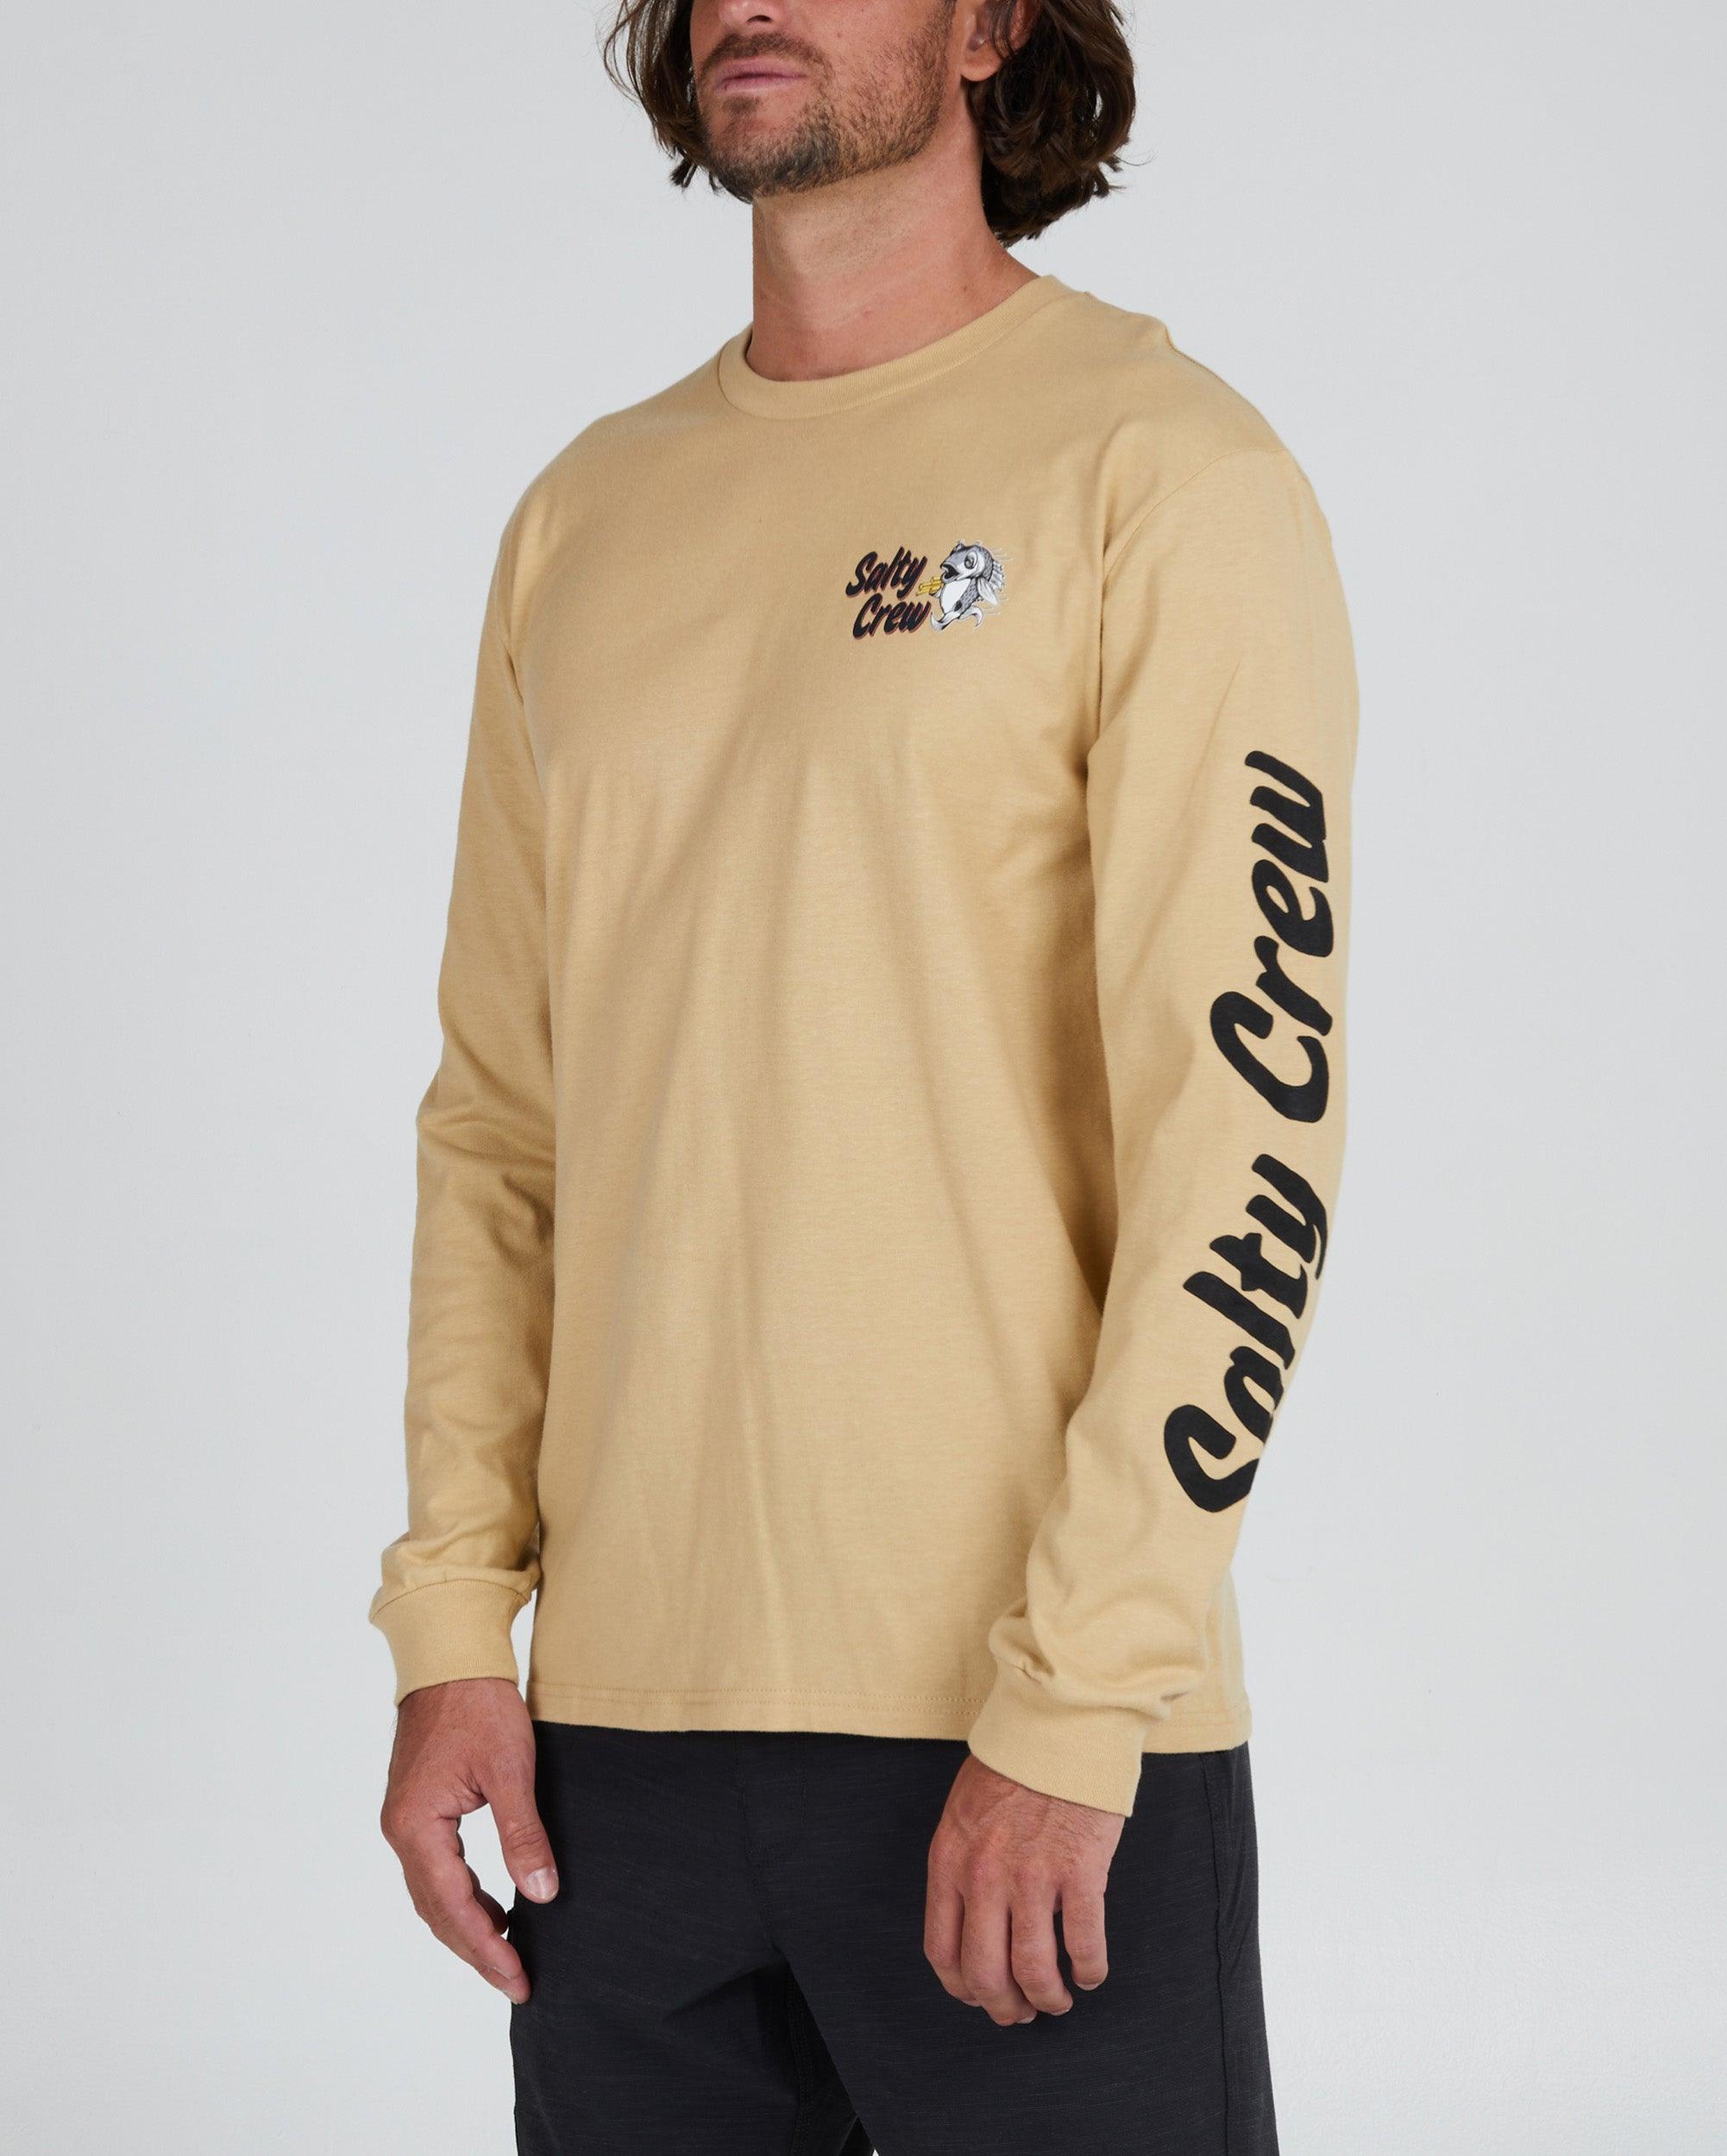 Fish N Chips L/S Tee - Camel - Purpose-Built / Home of the Trades